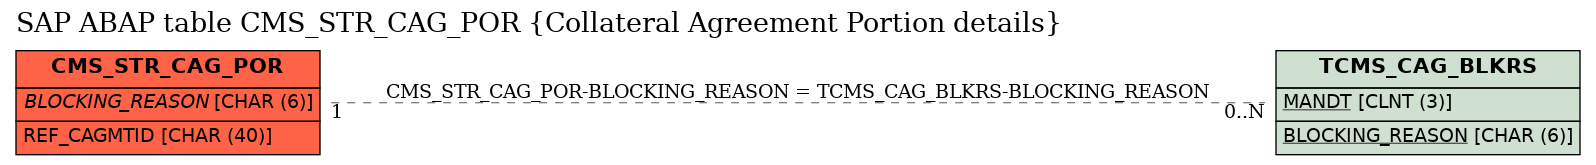 E-R Diagram for table CMS_STR_CAG_POR (Collateral Agreement Portion details)